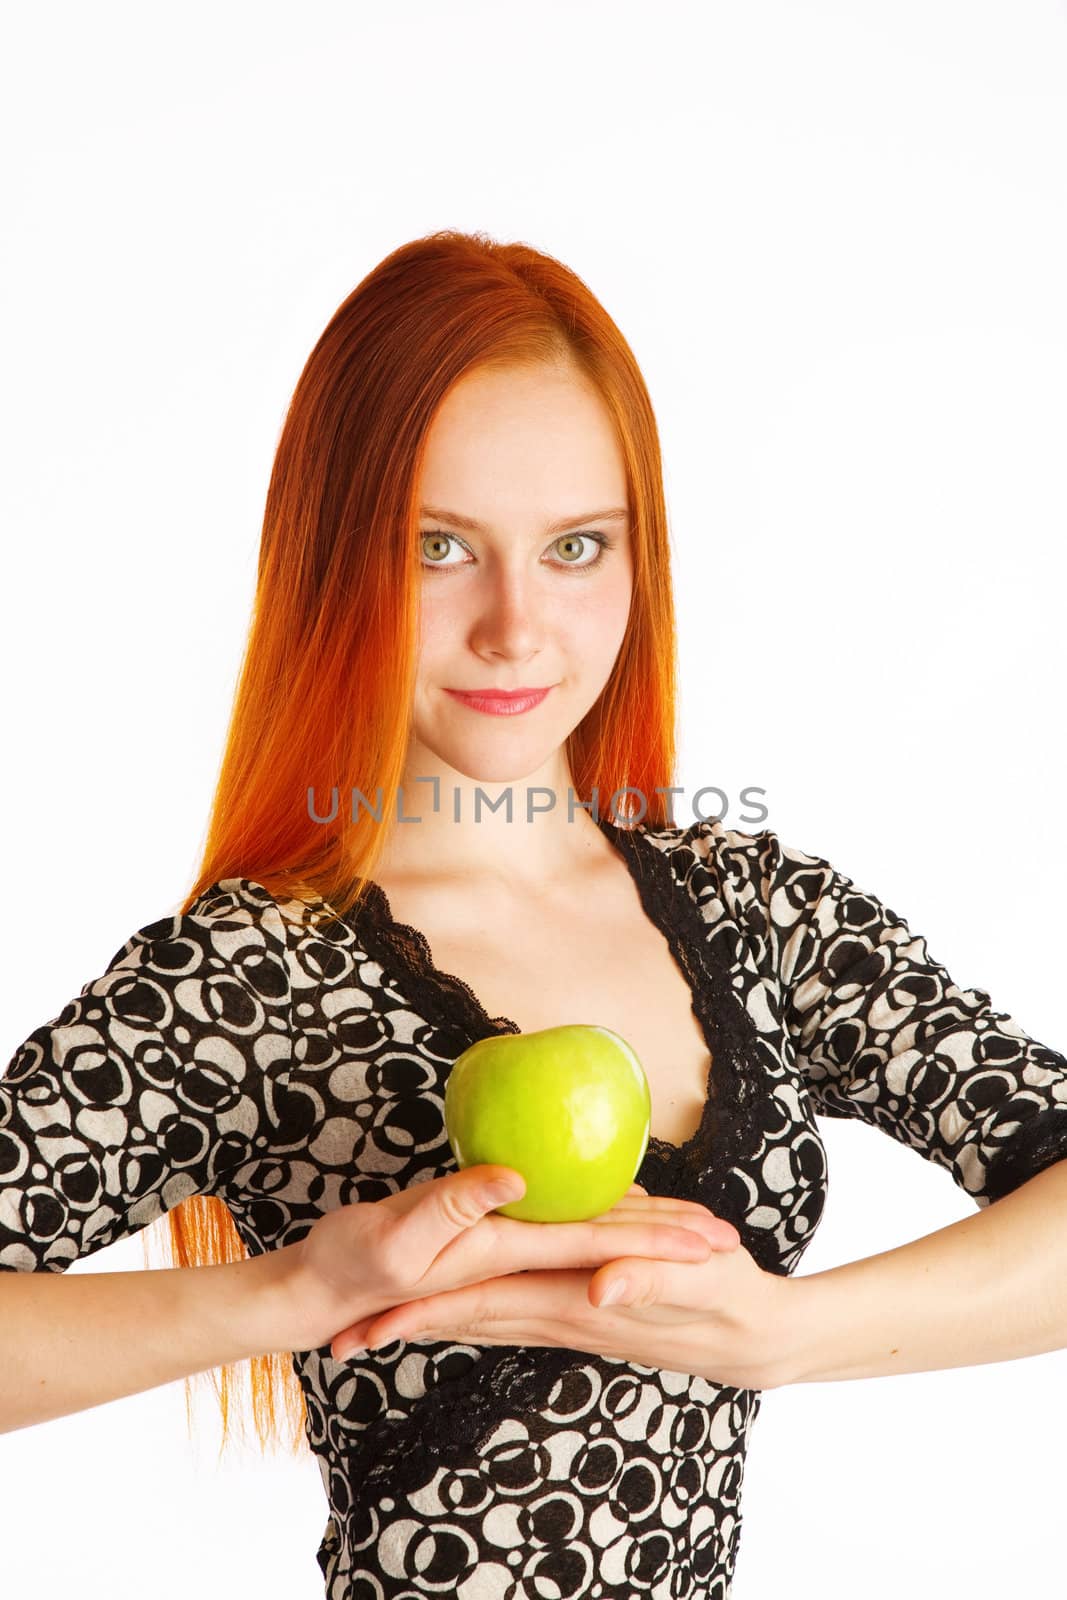 apple and girl by vsurkov